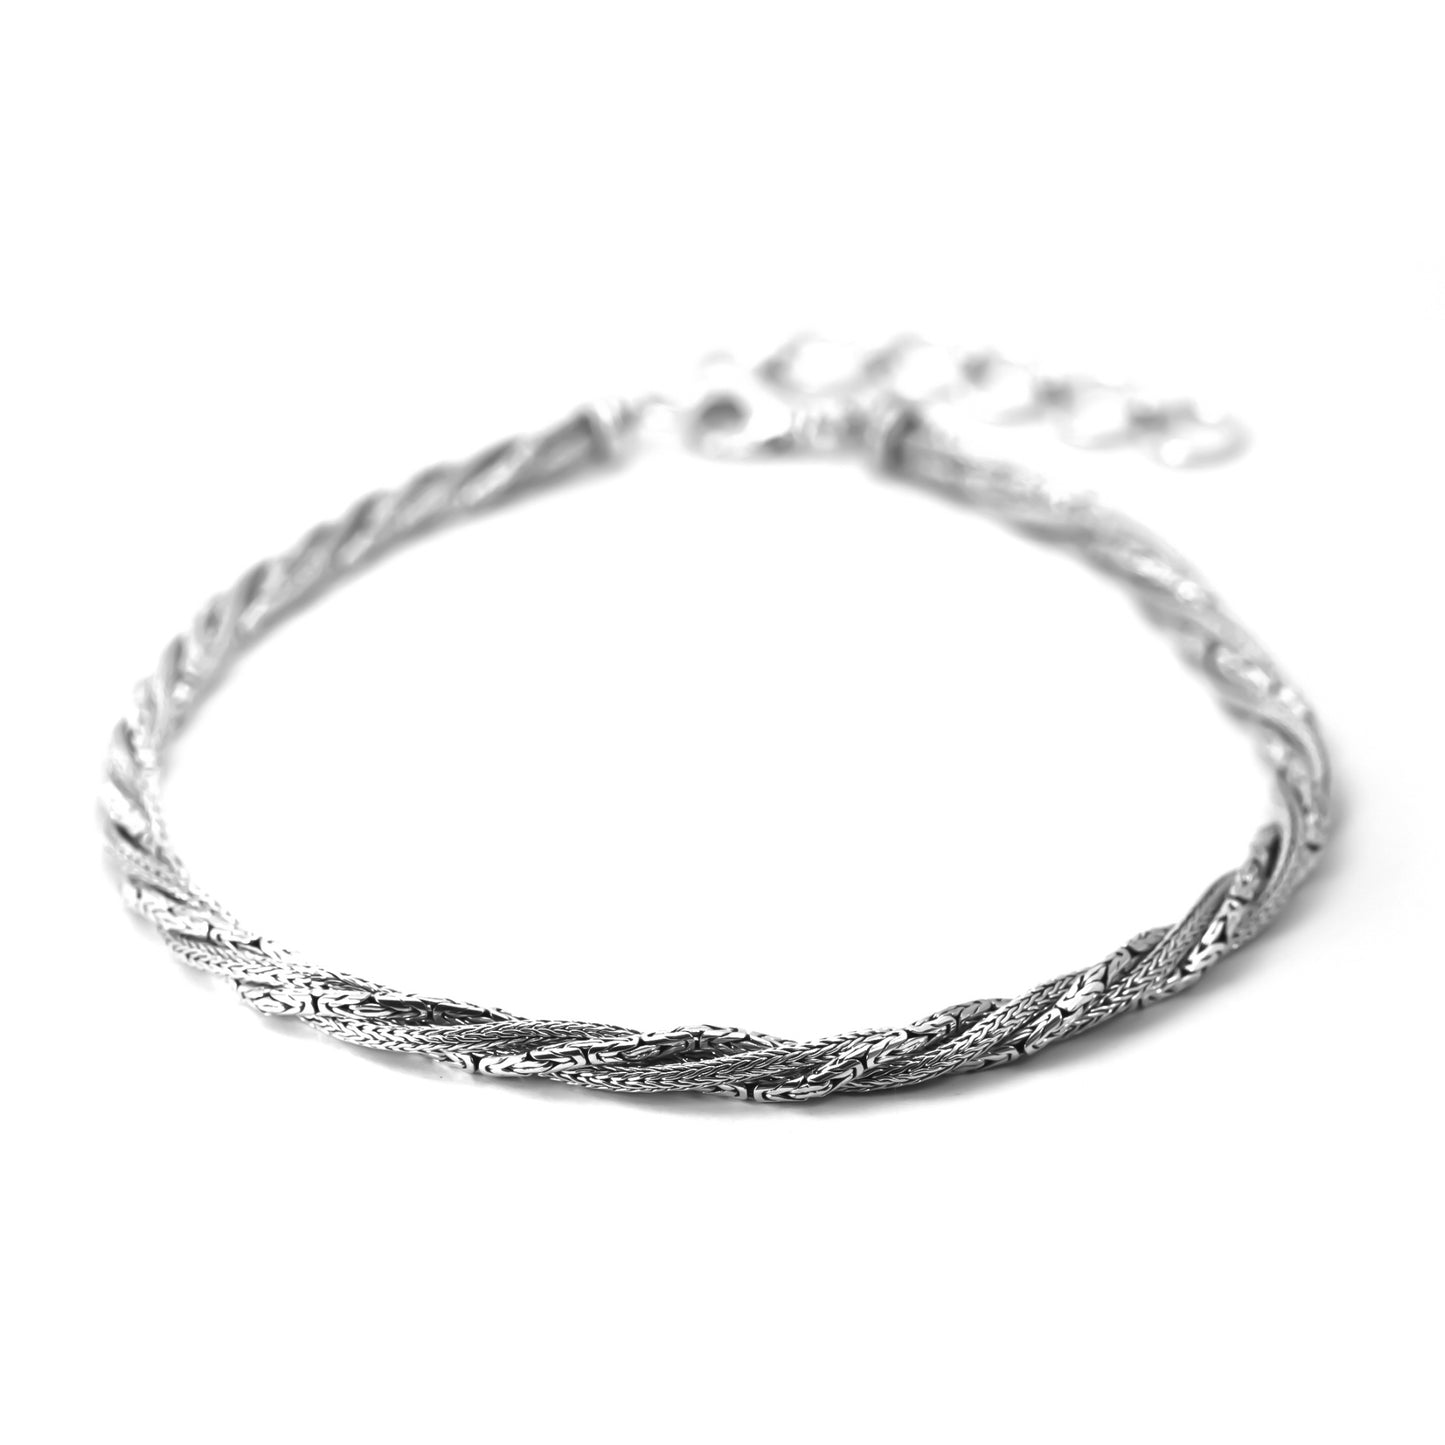 N522 .925 Sterling Silver Twisted Bali Chain Necklace